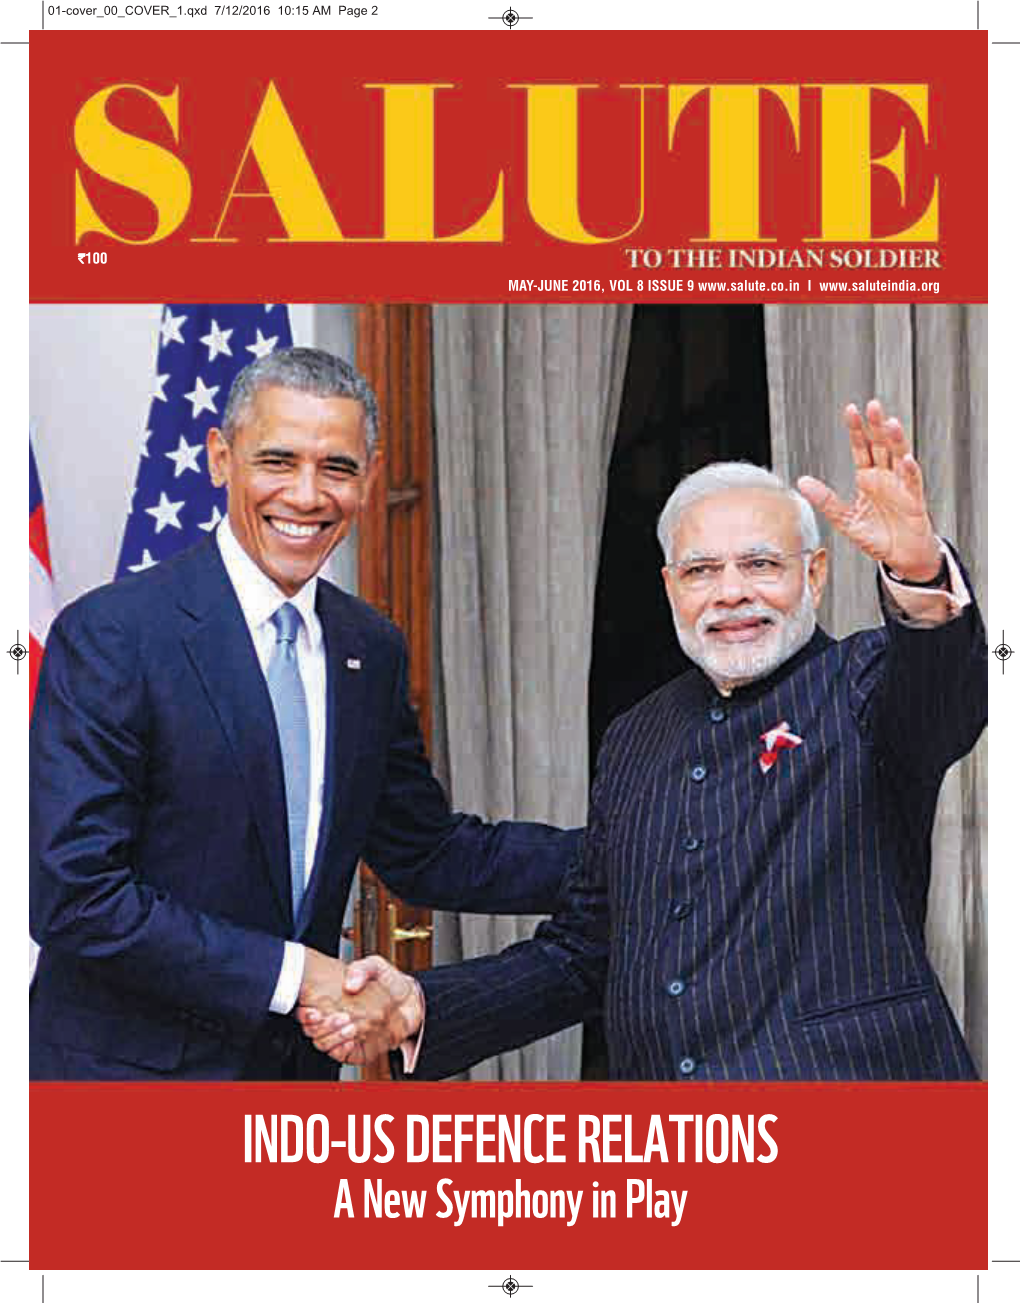 INDO-US DEFENCE RELATIONS a New Symphony in Play 44-Back Cover 14 19 BEING a FLY GIRL.Qxd 1/15/2015 9:56 PM Page 1